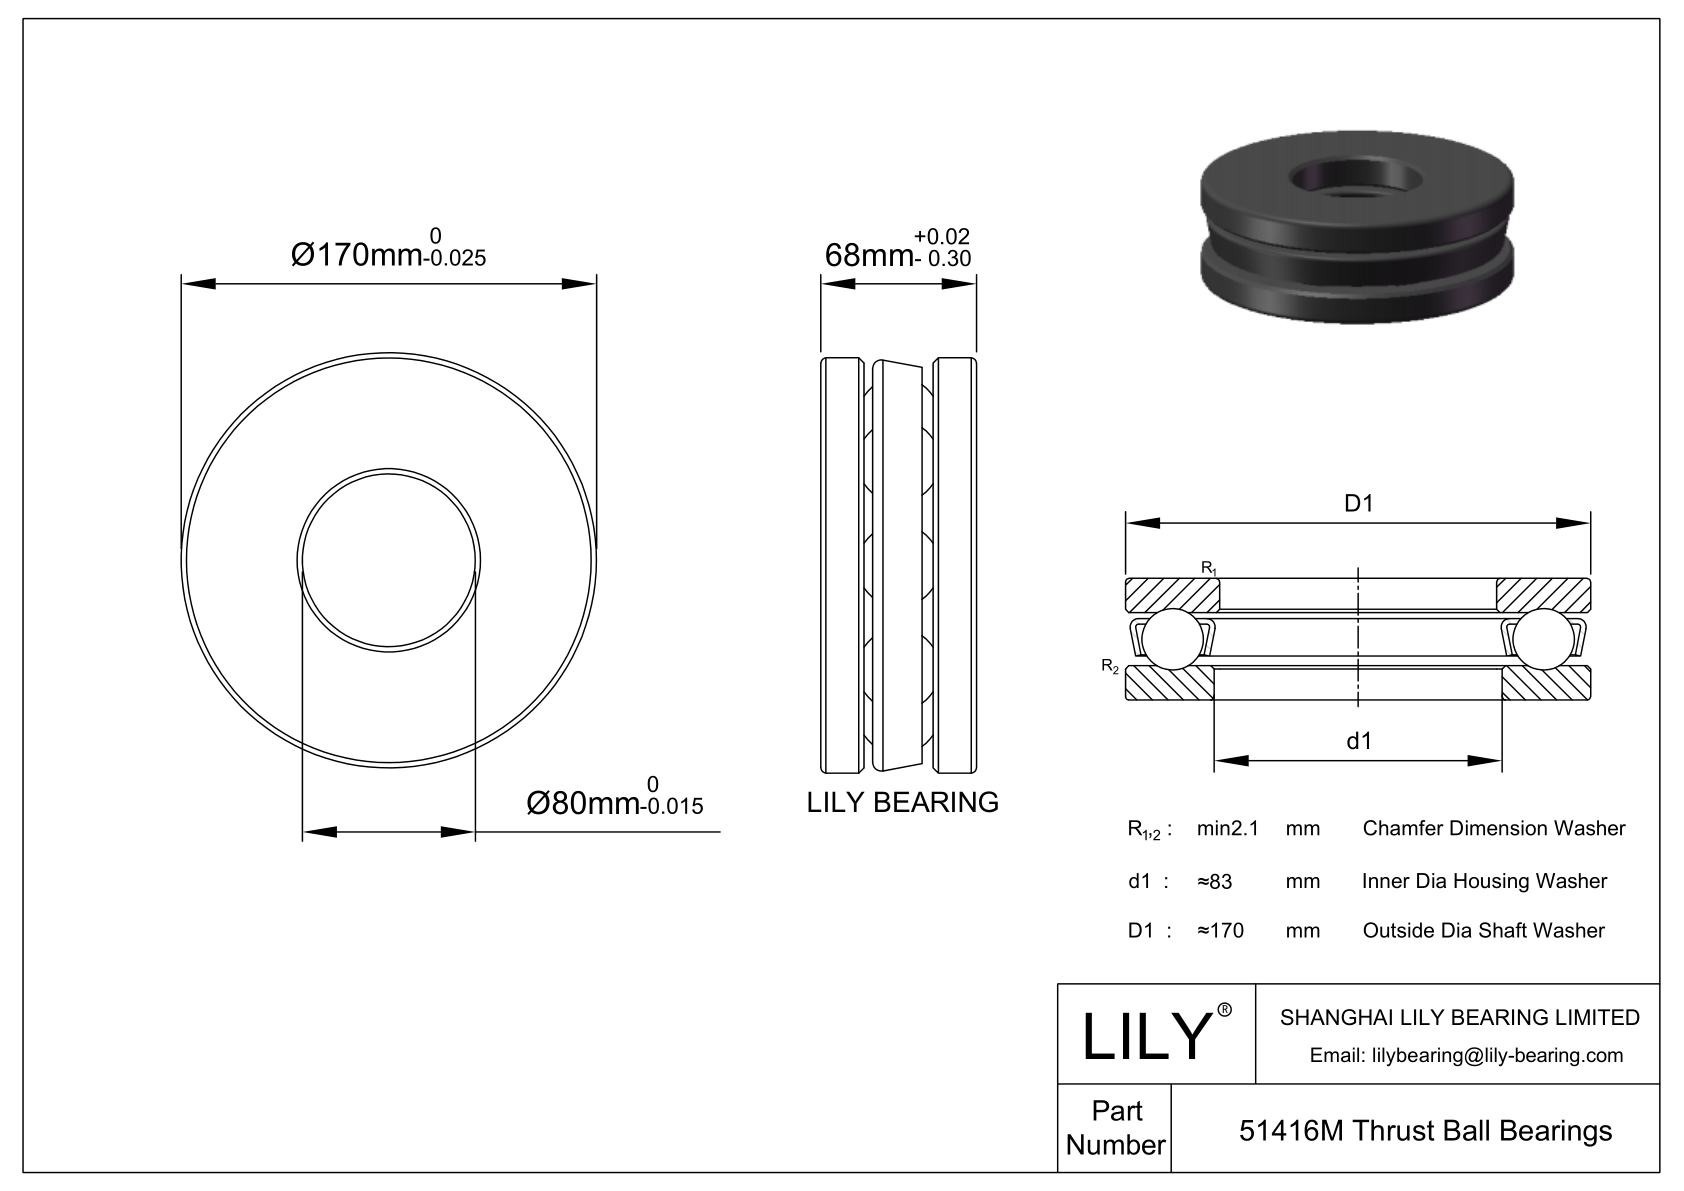 S51416 M Stainless Steel Single Direction Thrust Ball Bearing cad drawing